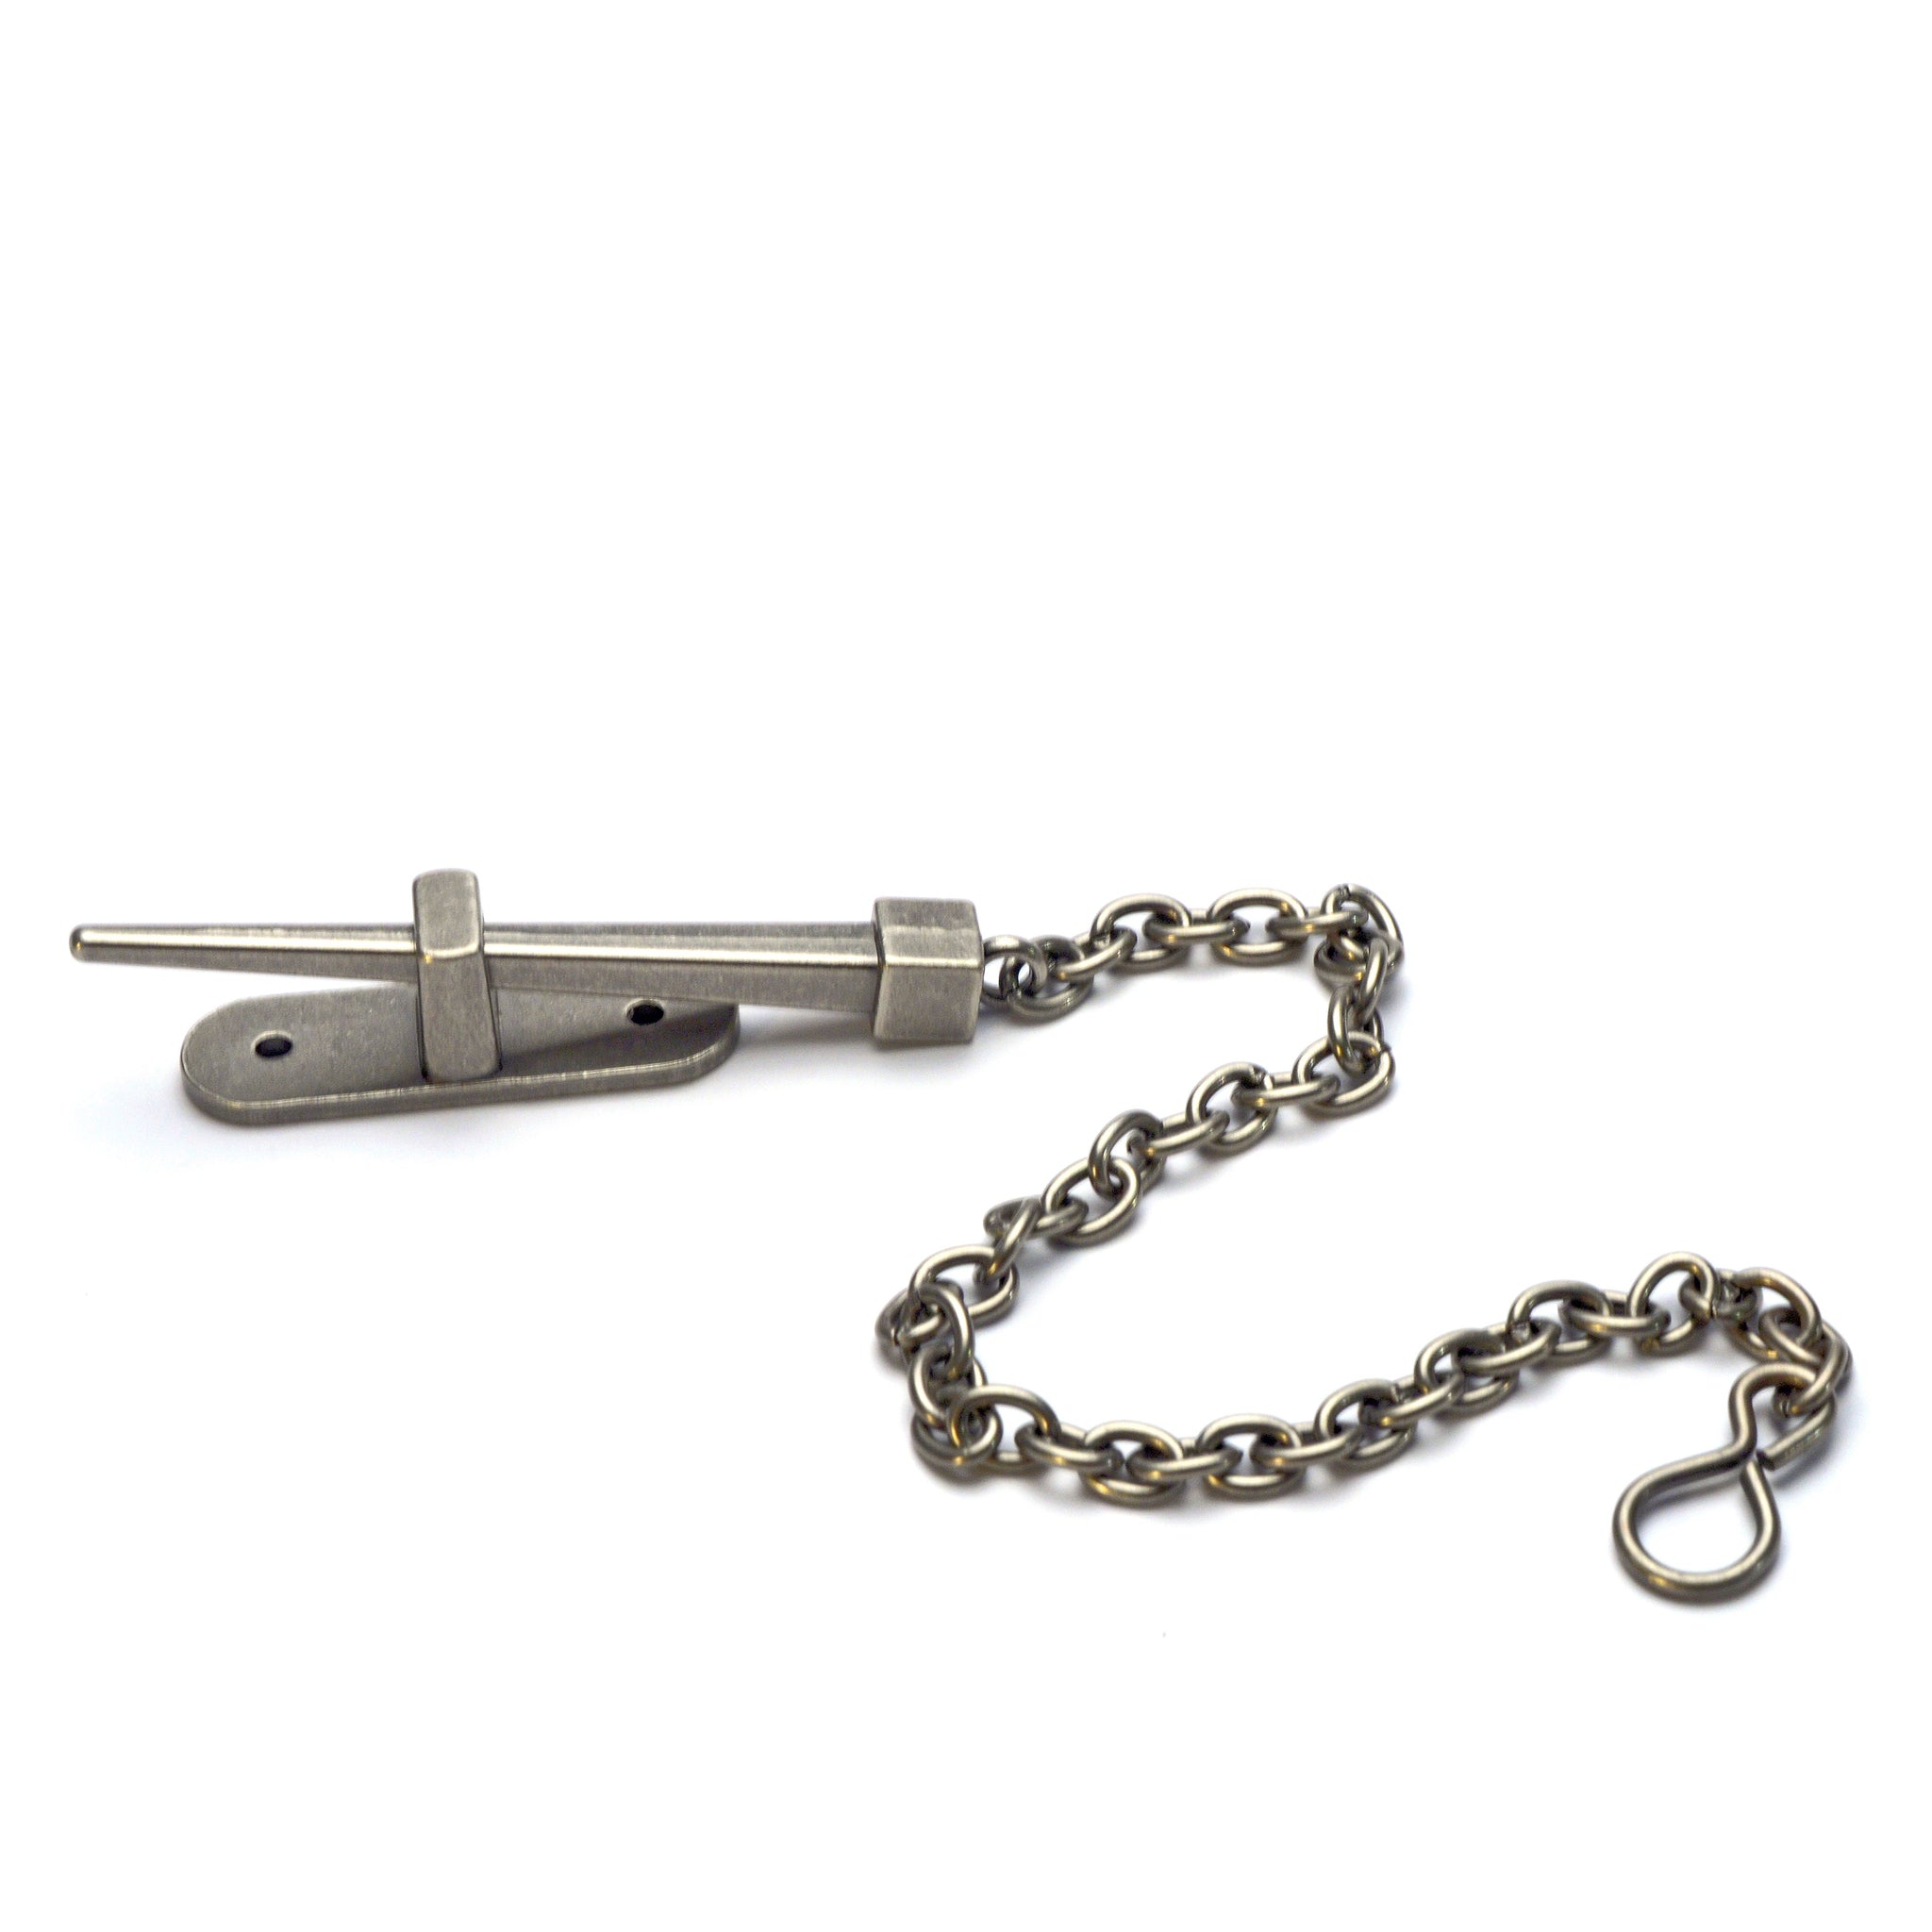 Antique Nickel Pin & Chain Clasp from Identity Leathercraft